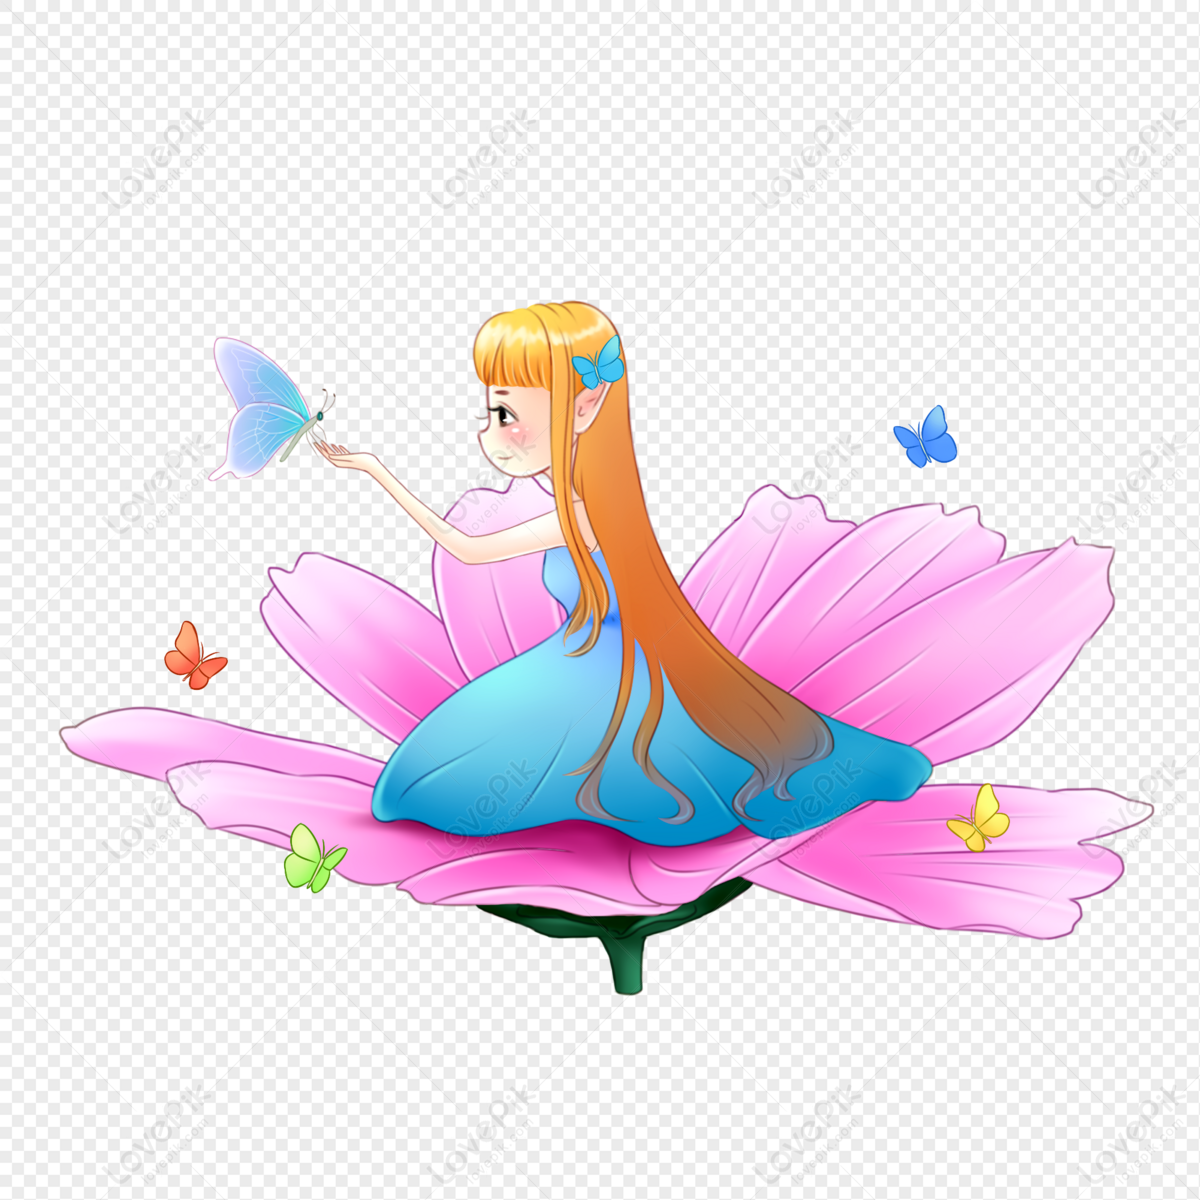 Thumbelina PNG Free Download And Clipart Image For Free Download - Lovepik  | 401300503